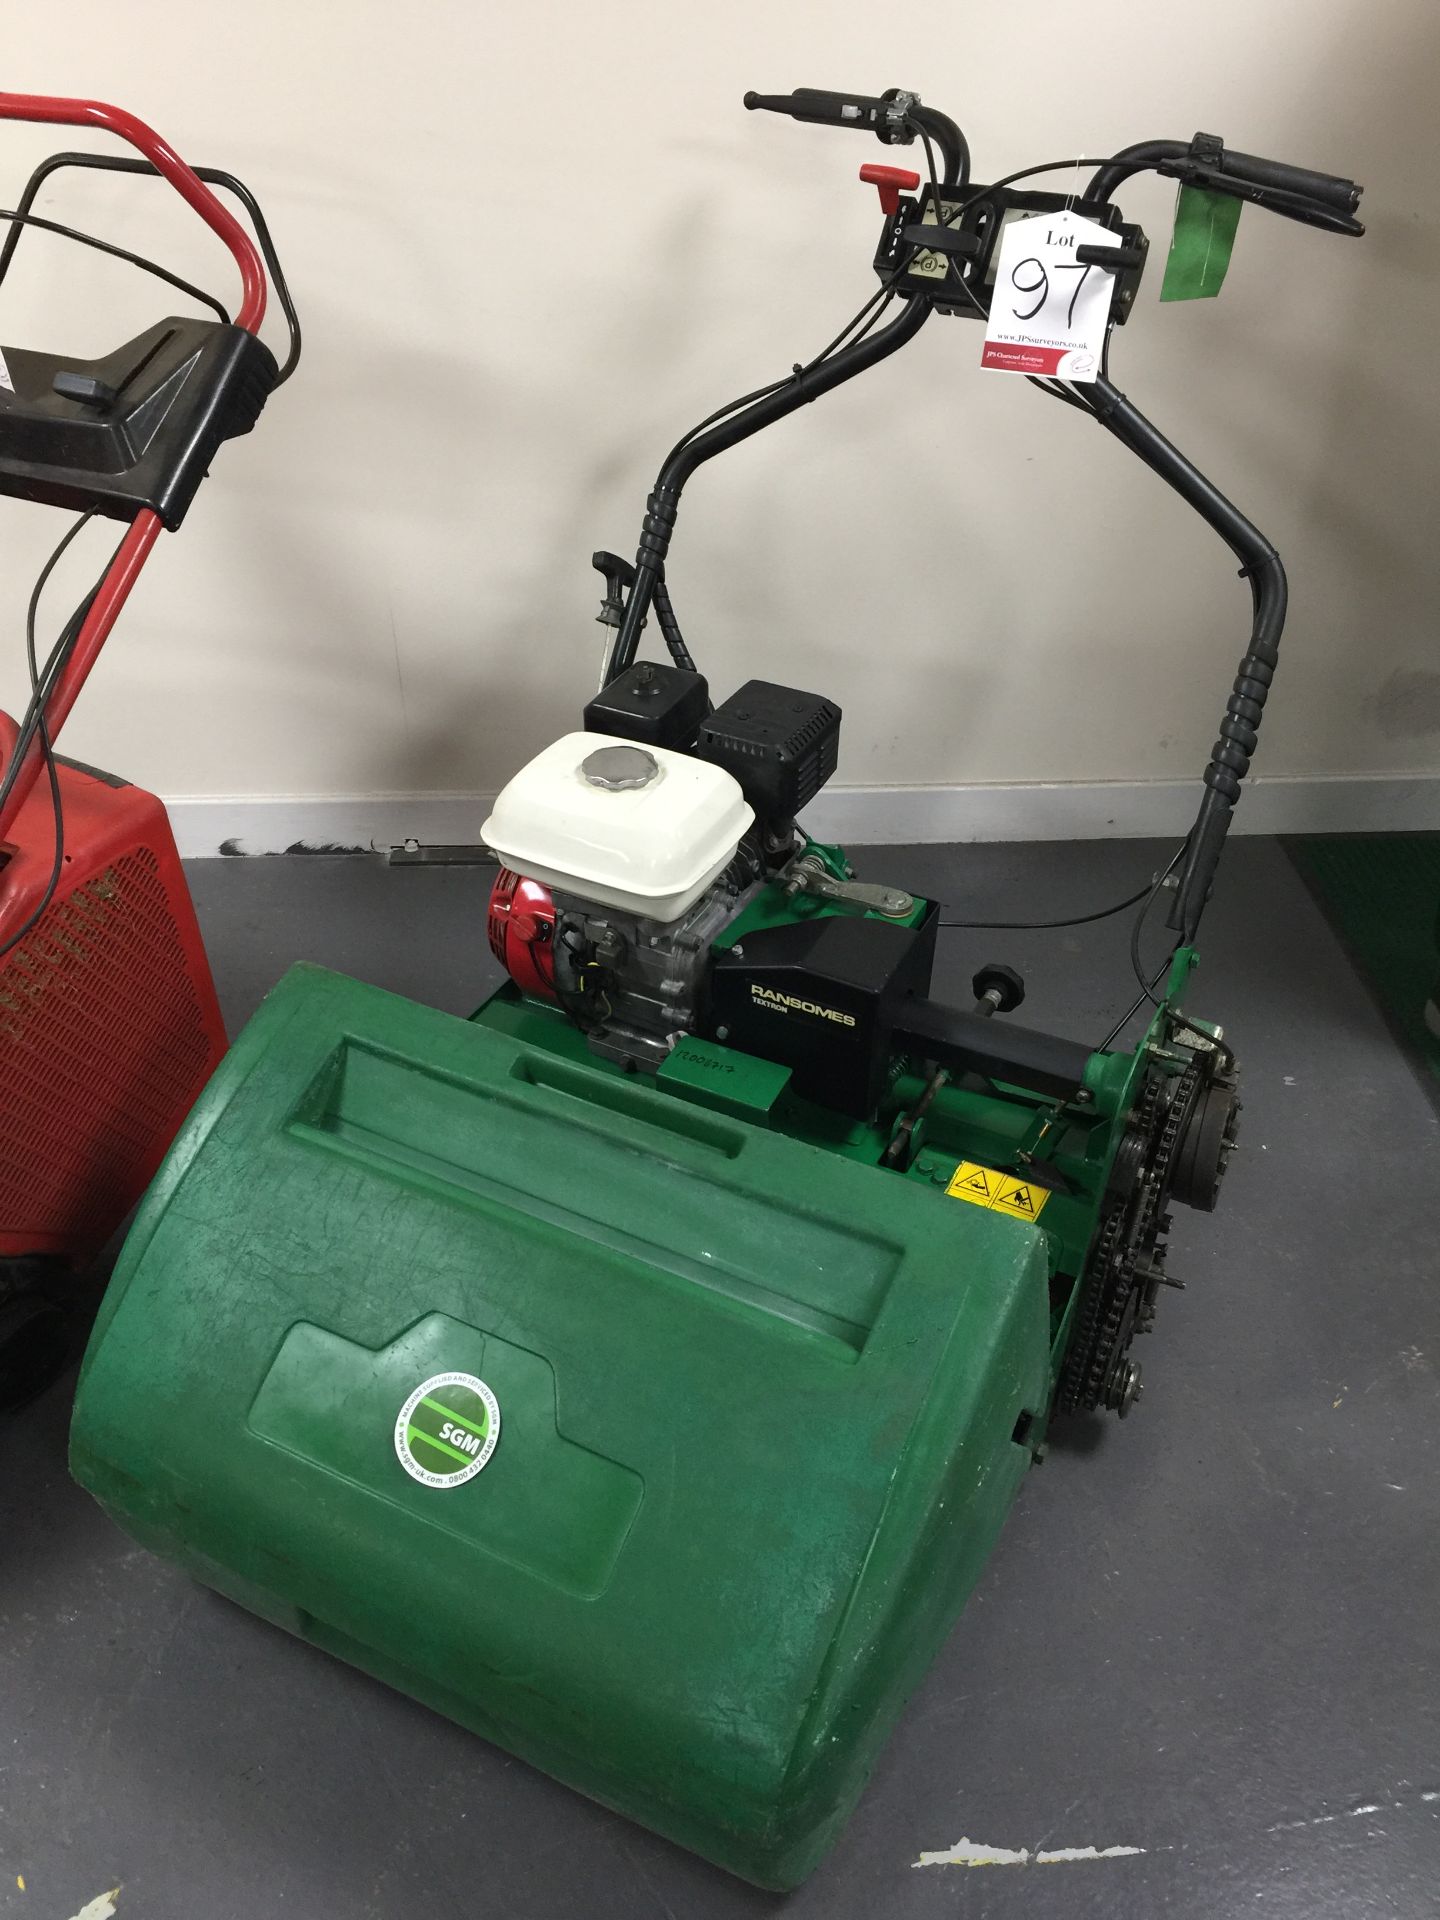 Ransomes Textron Lawn mower